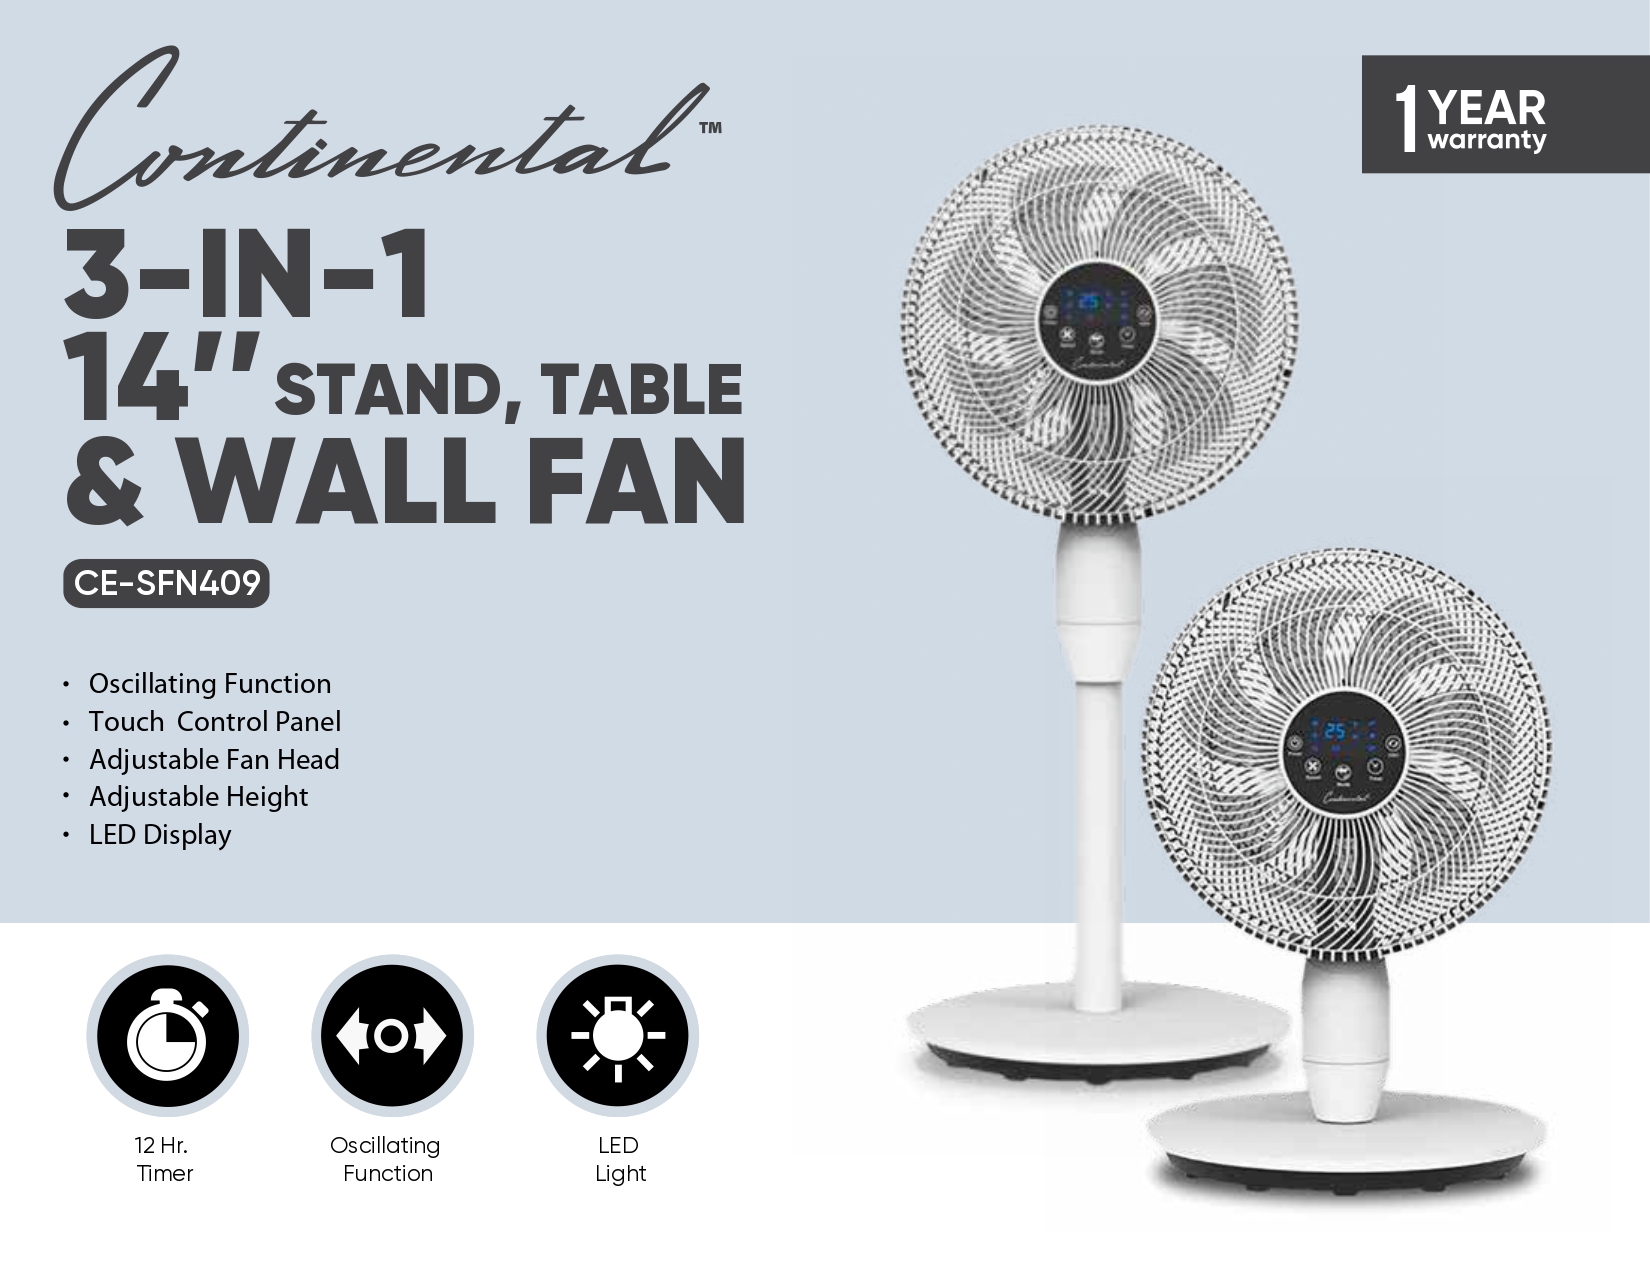 3-IN-1 14" STAND, TABLE & WALL FAN